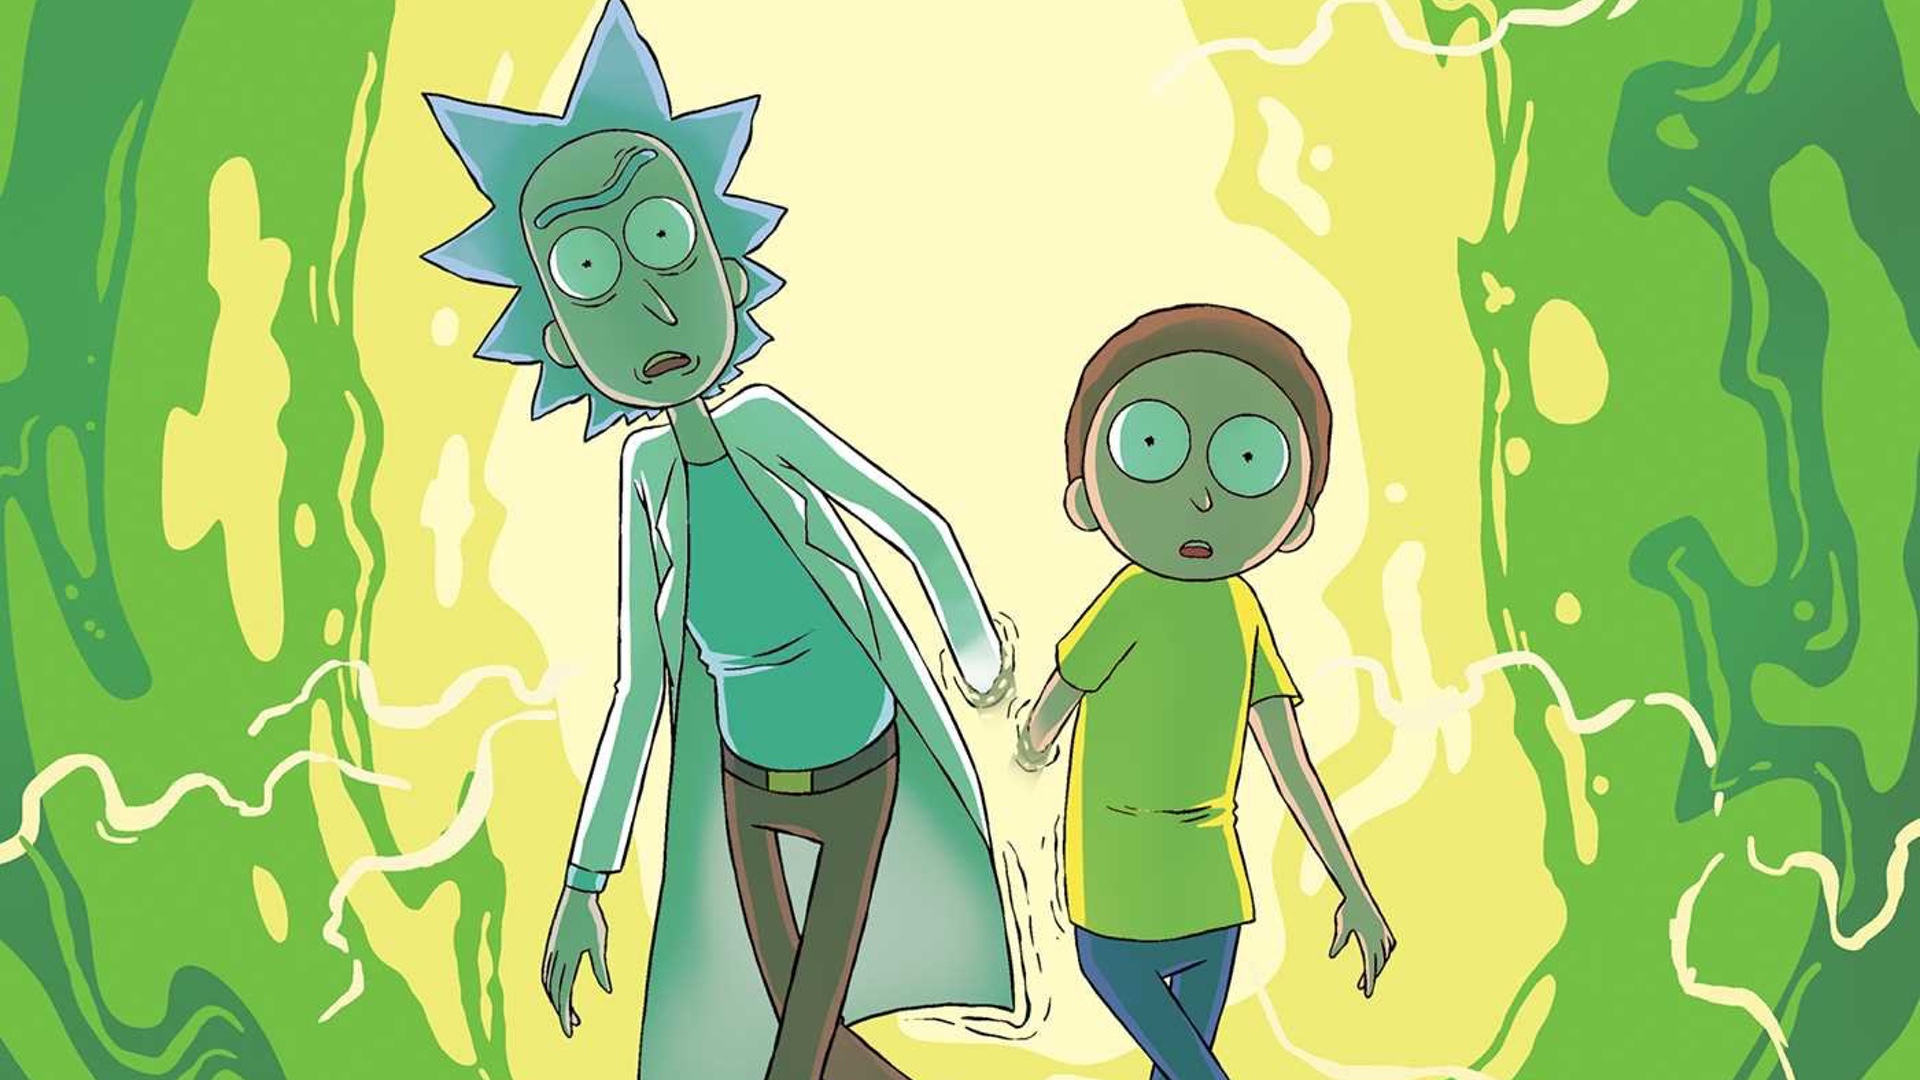 Rick and Morty Season 4 Episode 6 Release Date and Delay Reasons Revealed